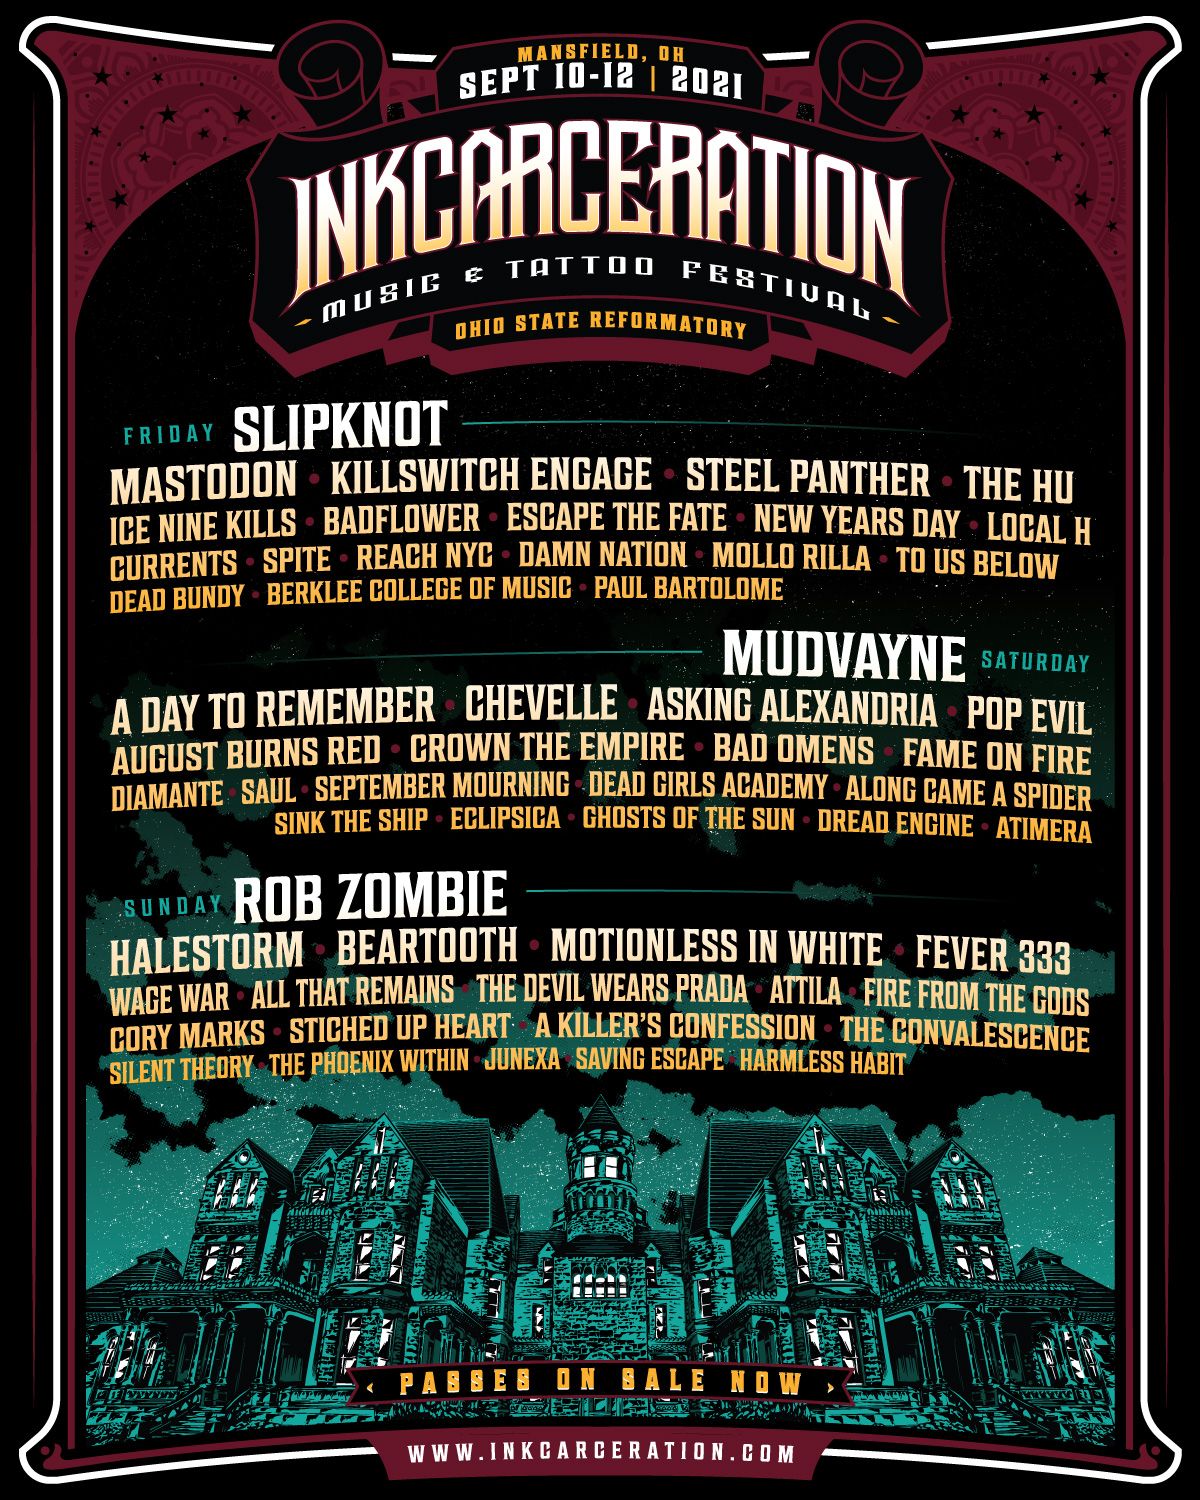 Inkcarceration Music Tattoo Festival Slipknot Rob Zombie Mudvayne First Reunion Show More Sept 10 12 At Historic Ohio State Reformatory With More Than 75 Tattoo Artists Celebrity Land International - songs for roblox escape the evil artist